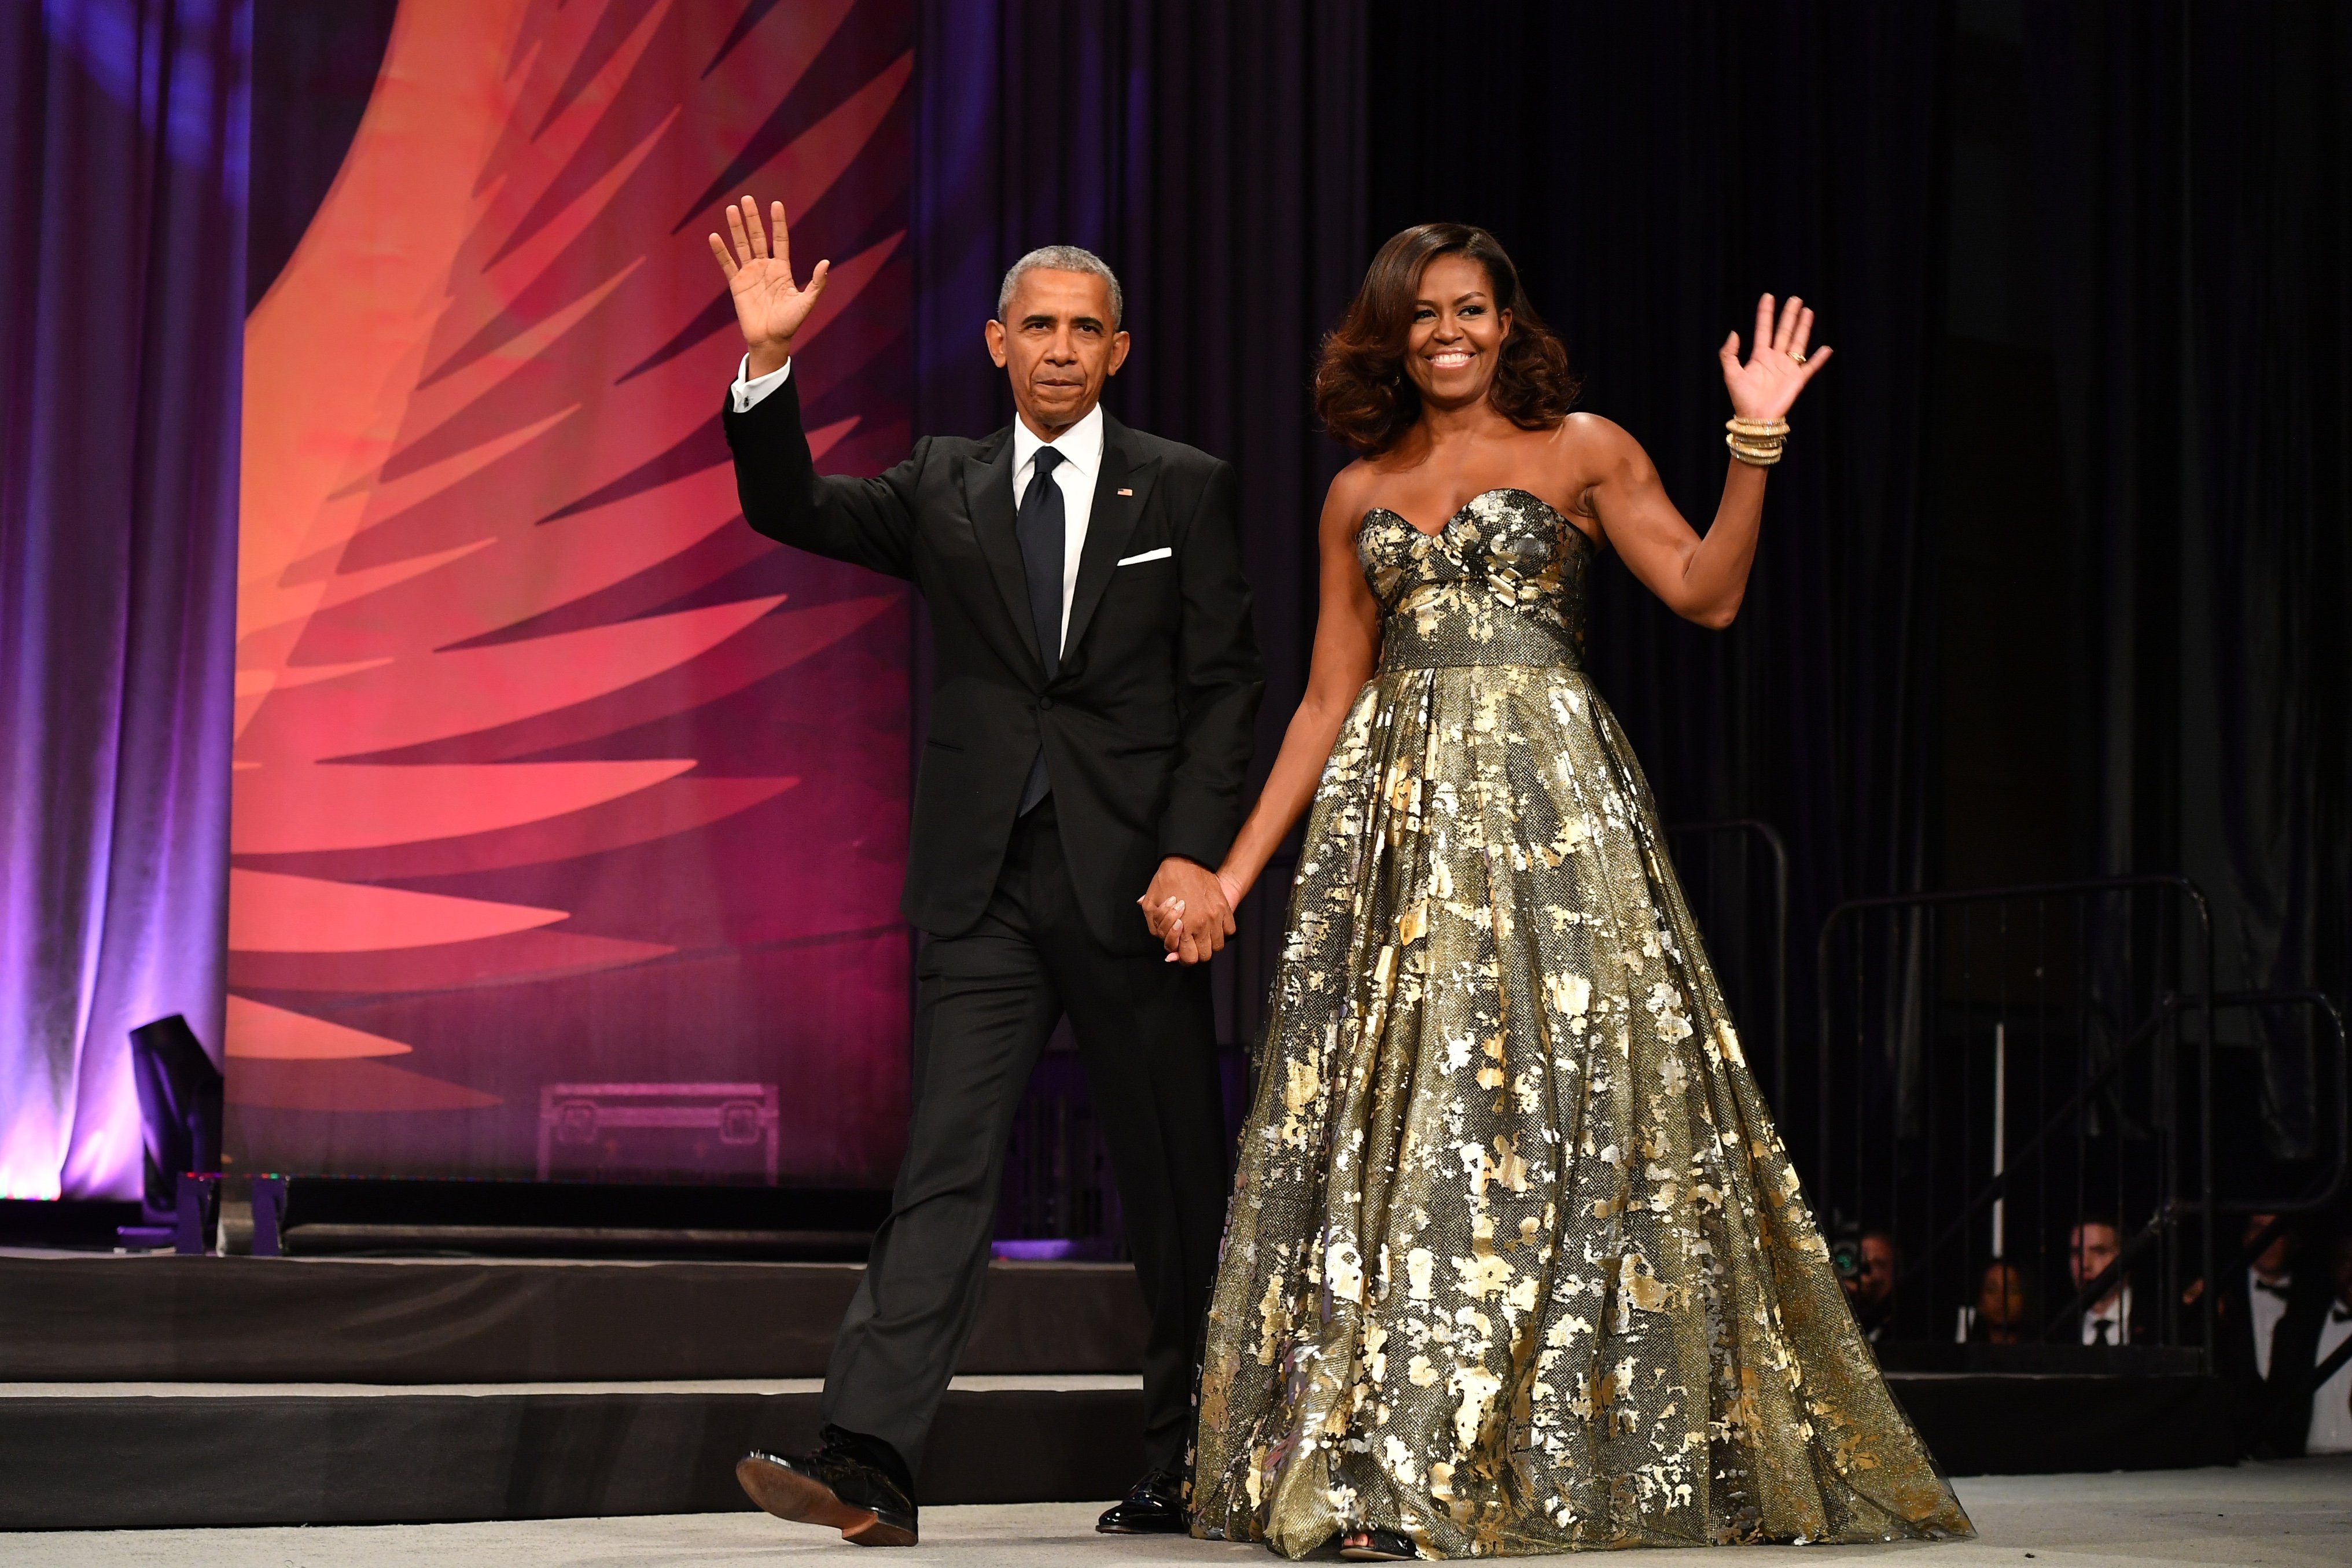 Barack Obama and Michelle Obama arrive at the Phoenix Awards Dinner at Walter E. Washington Convention Center on September 17, 2016 | Photo: GettyImages